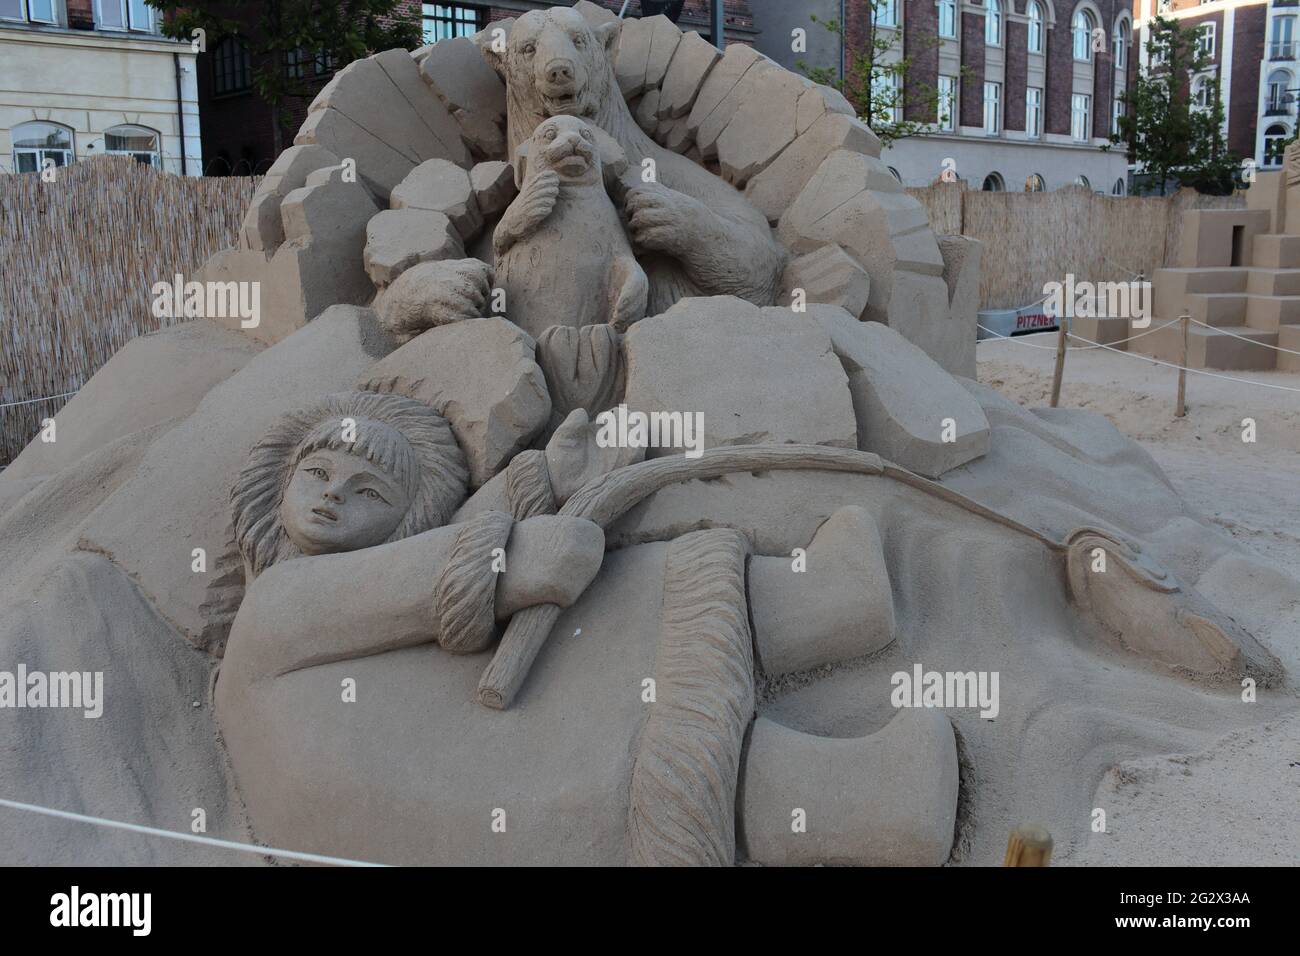 one of the most spectacular sand sculpture events in Copenhagen/Denmark. 'Antartic' by Katsu Chaen (Japan) and Bagrat Stephanyan (Russia). Stock Photo